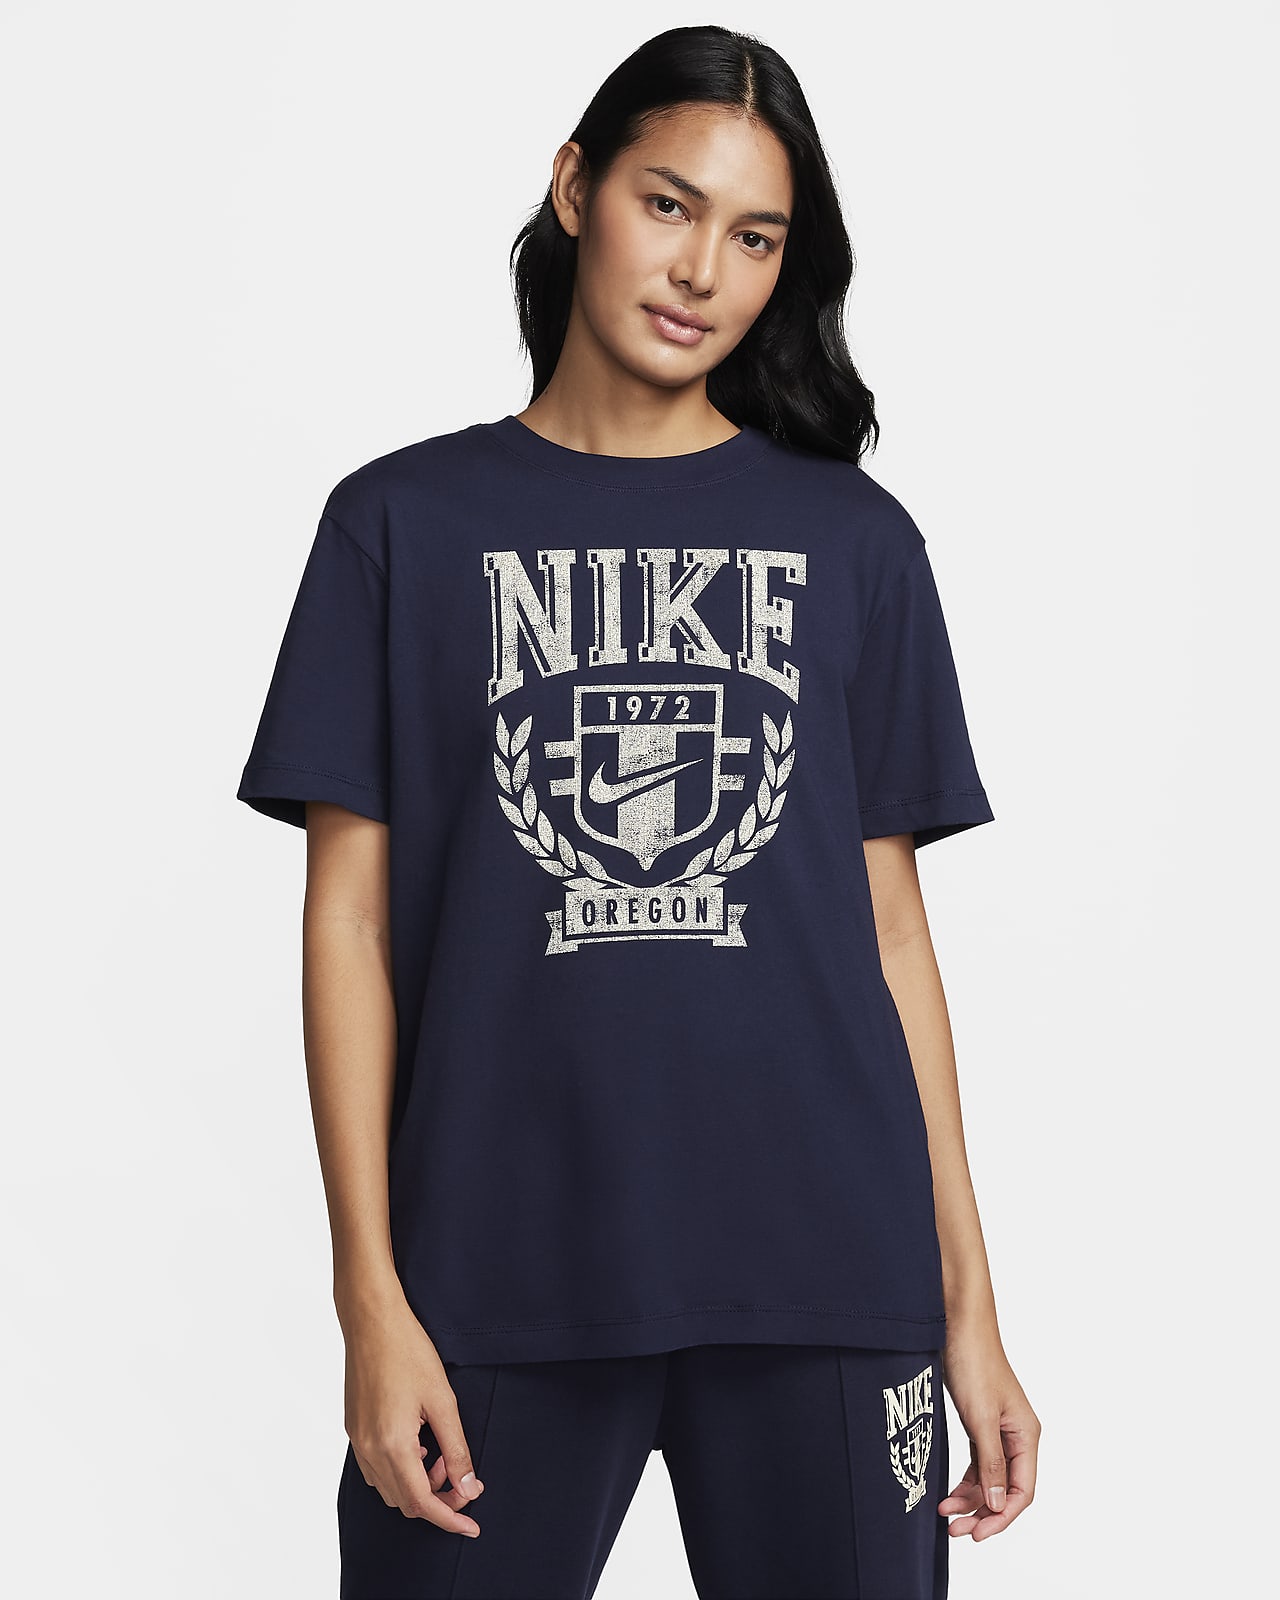 https://static.nike.com/a/images/t_PDP_1280_v1/f_auto,q_auto:eco/6959203e-20a5-4166-a6fc-5c03c77fa77e/t-shirt-sportswear-pour-jC02vN.png